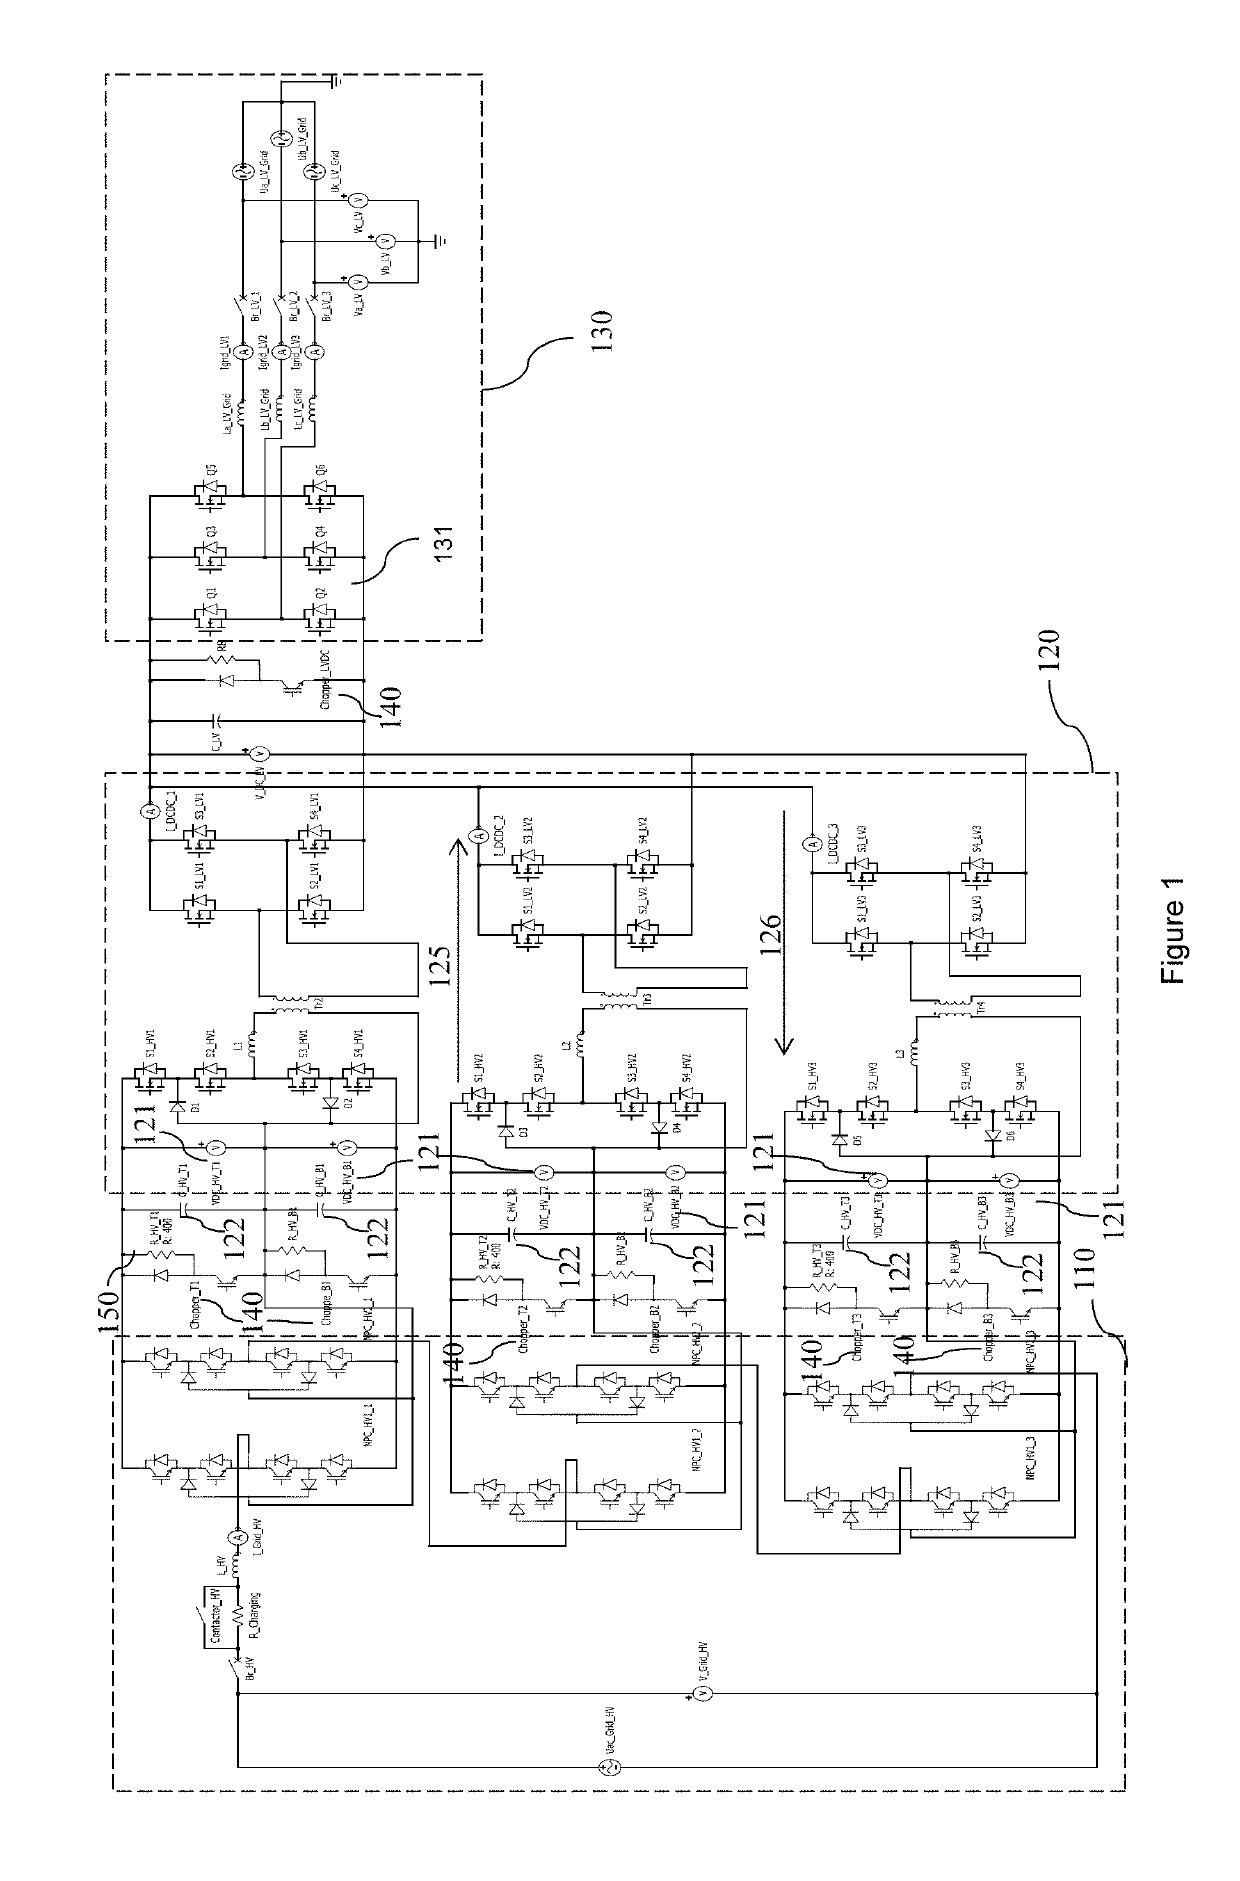 Dual voltage and current loop linearization control and voltage balancing control for solid state transformer